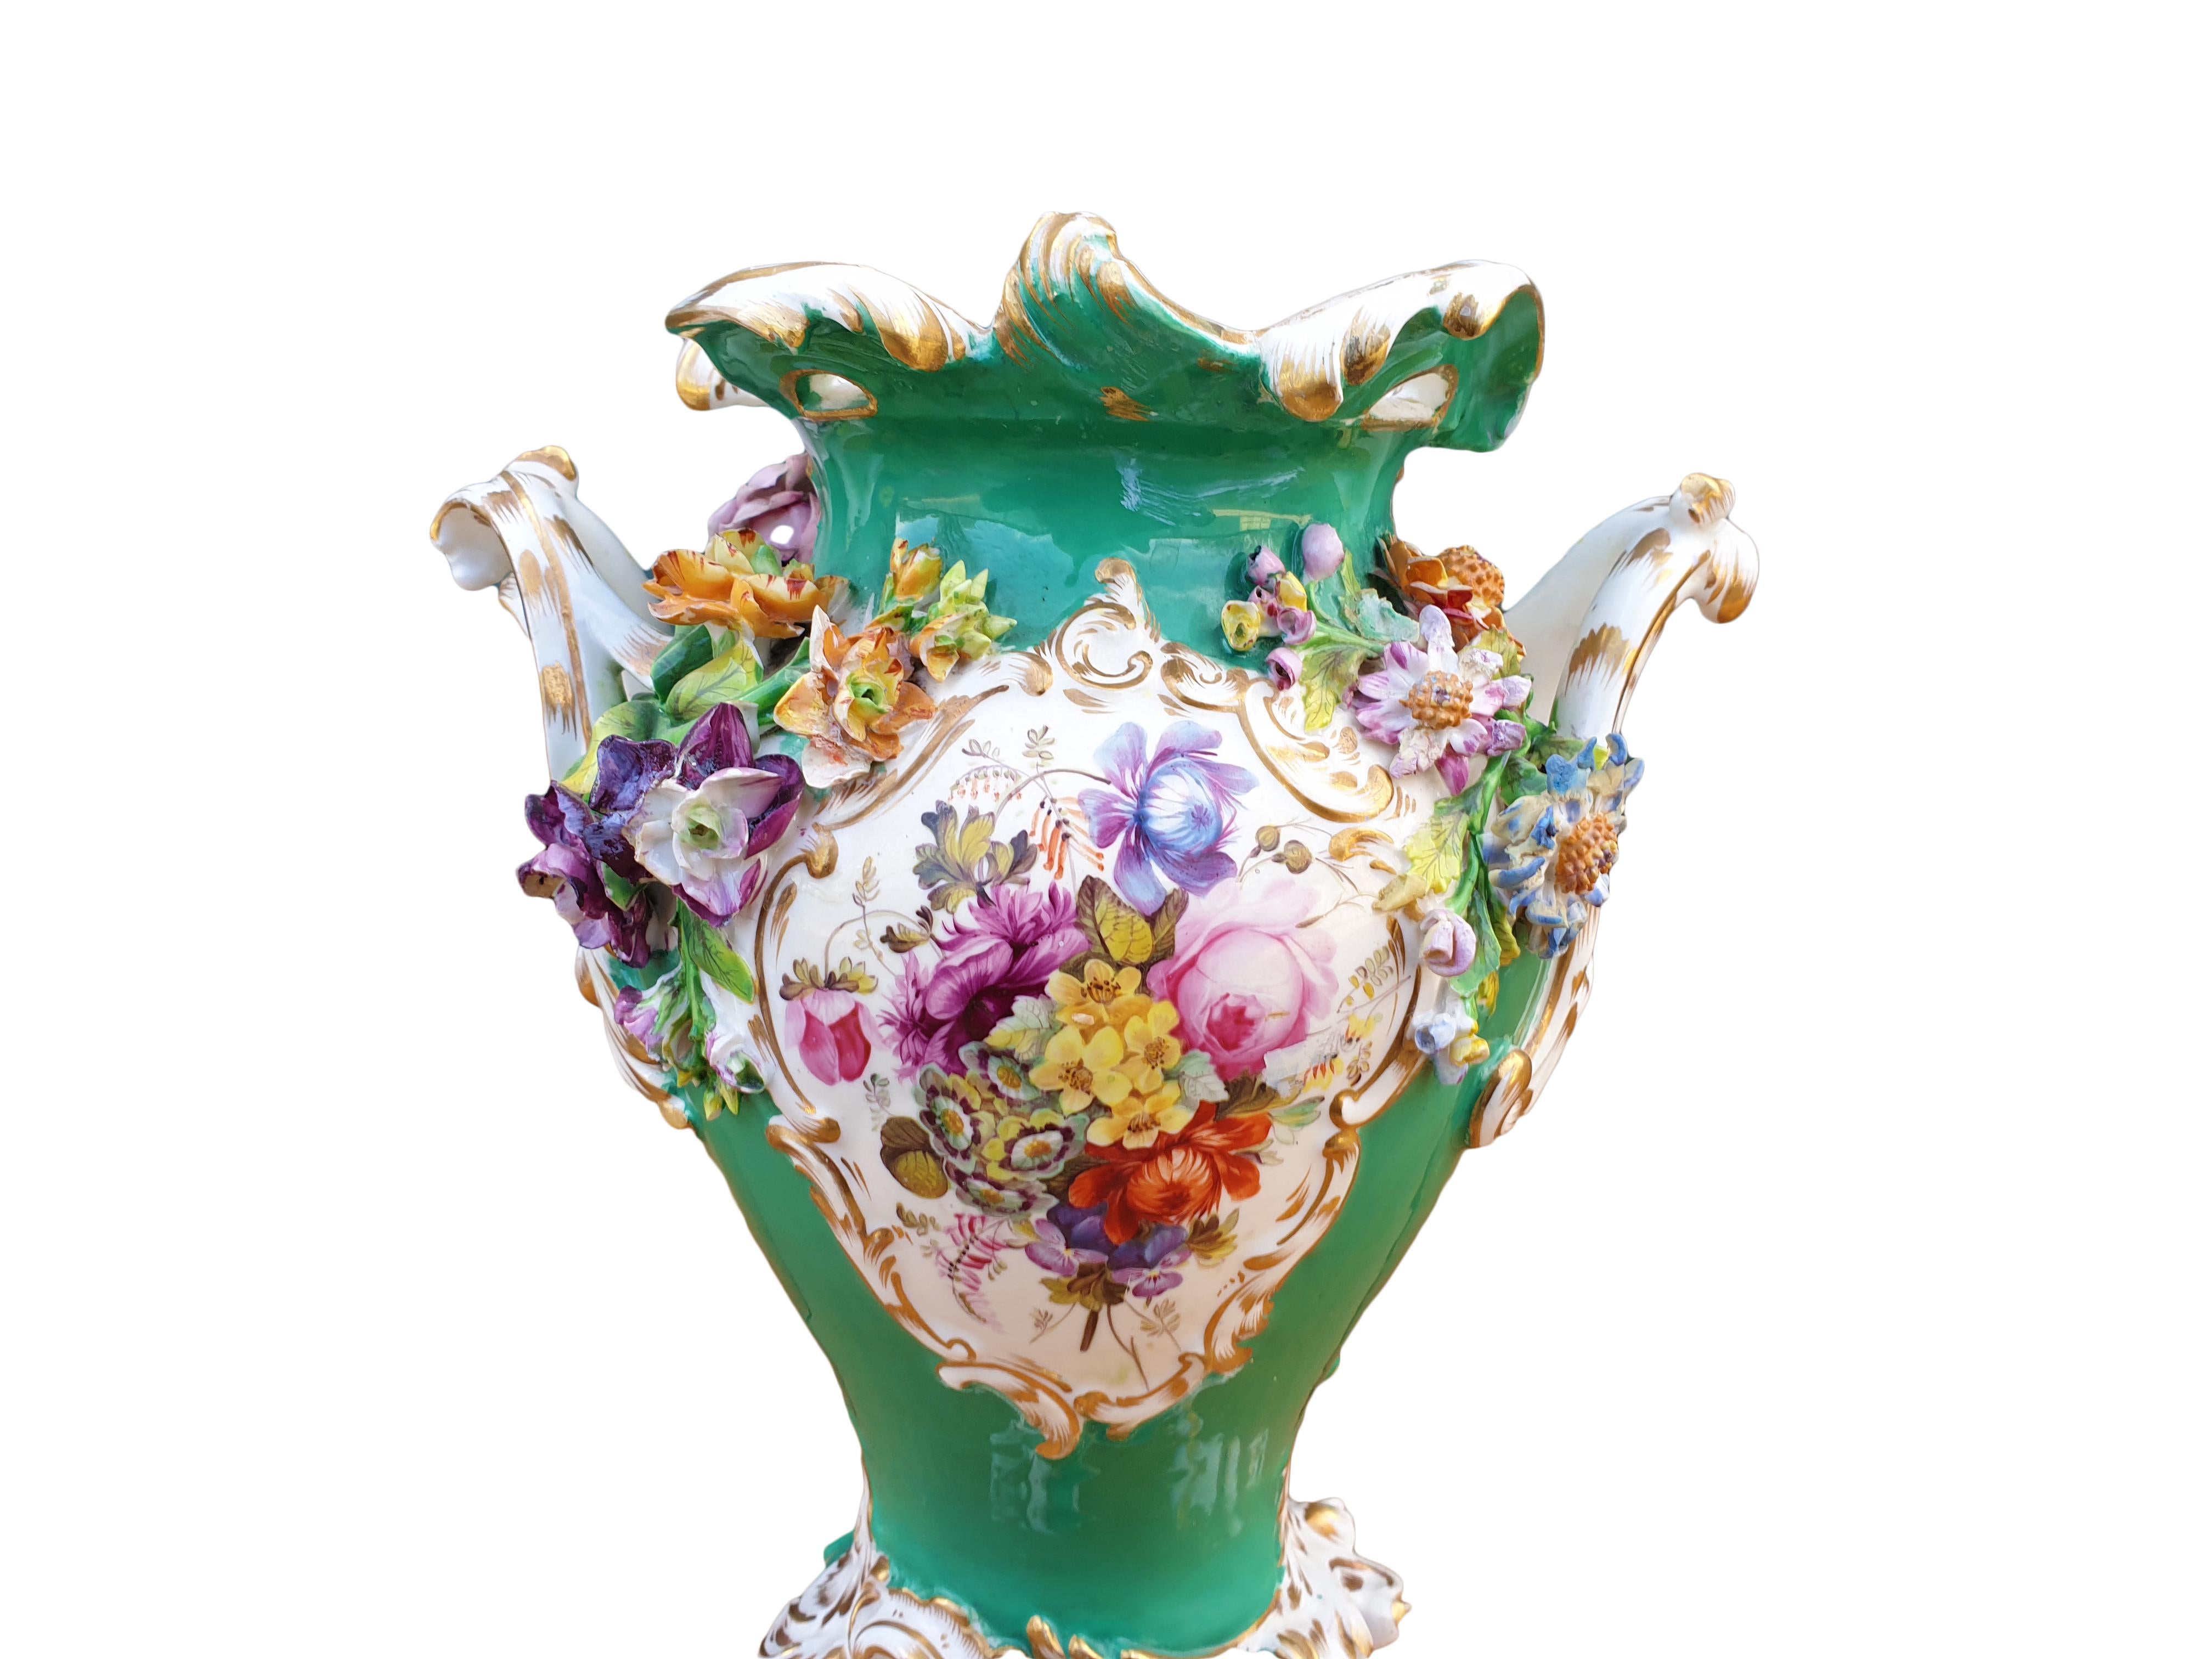 A lovely Coalport Green single Vase with Encrusted flowers and a feast of Handpainted garden flowers in the middle, the seasons all mixed in a kaleidoscope of colors. The encrusted flowers comes in varying sizes while the bigger ones has a diameter